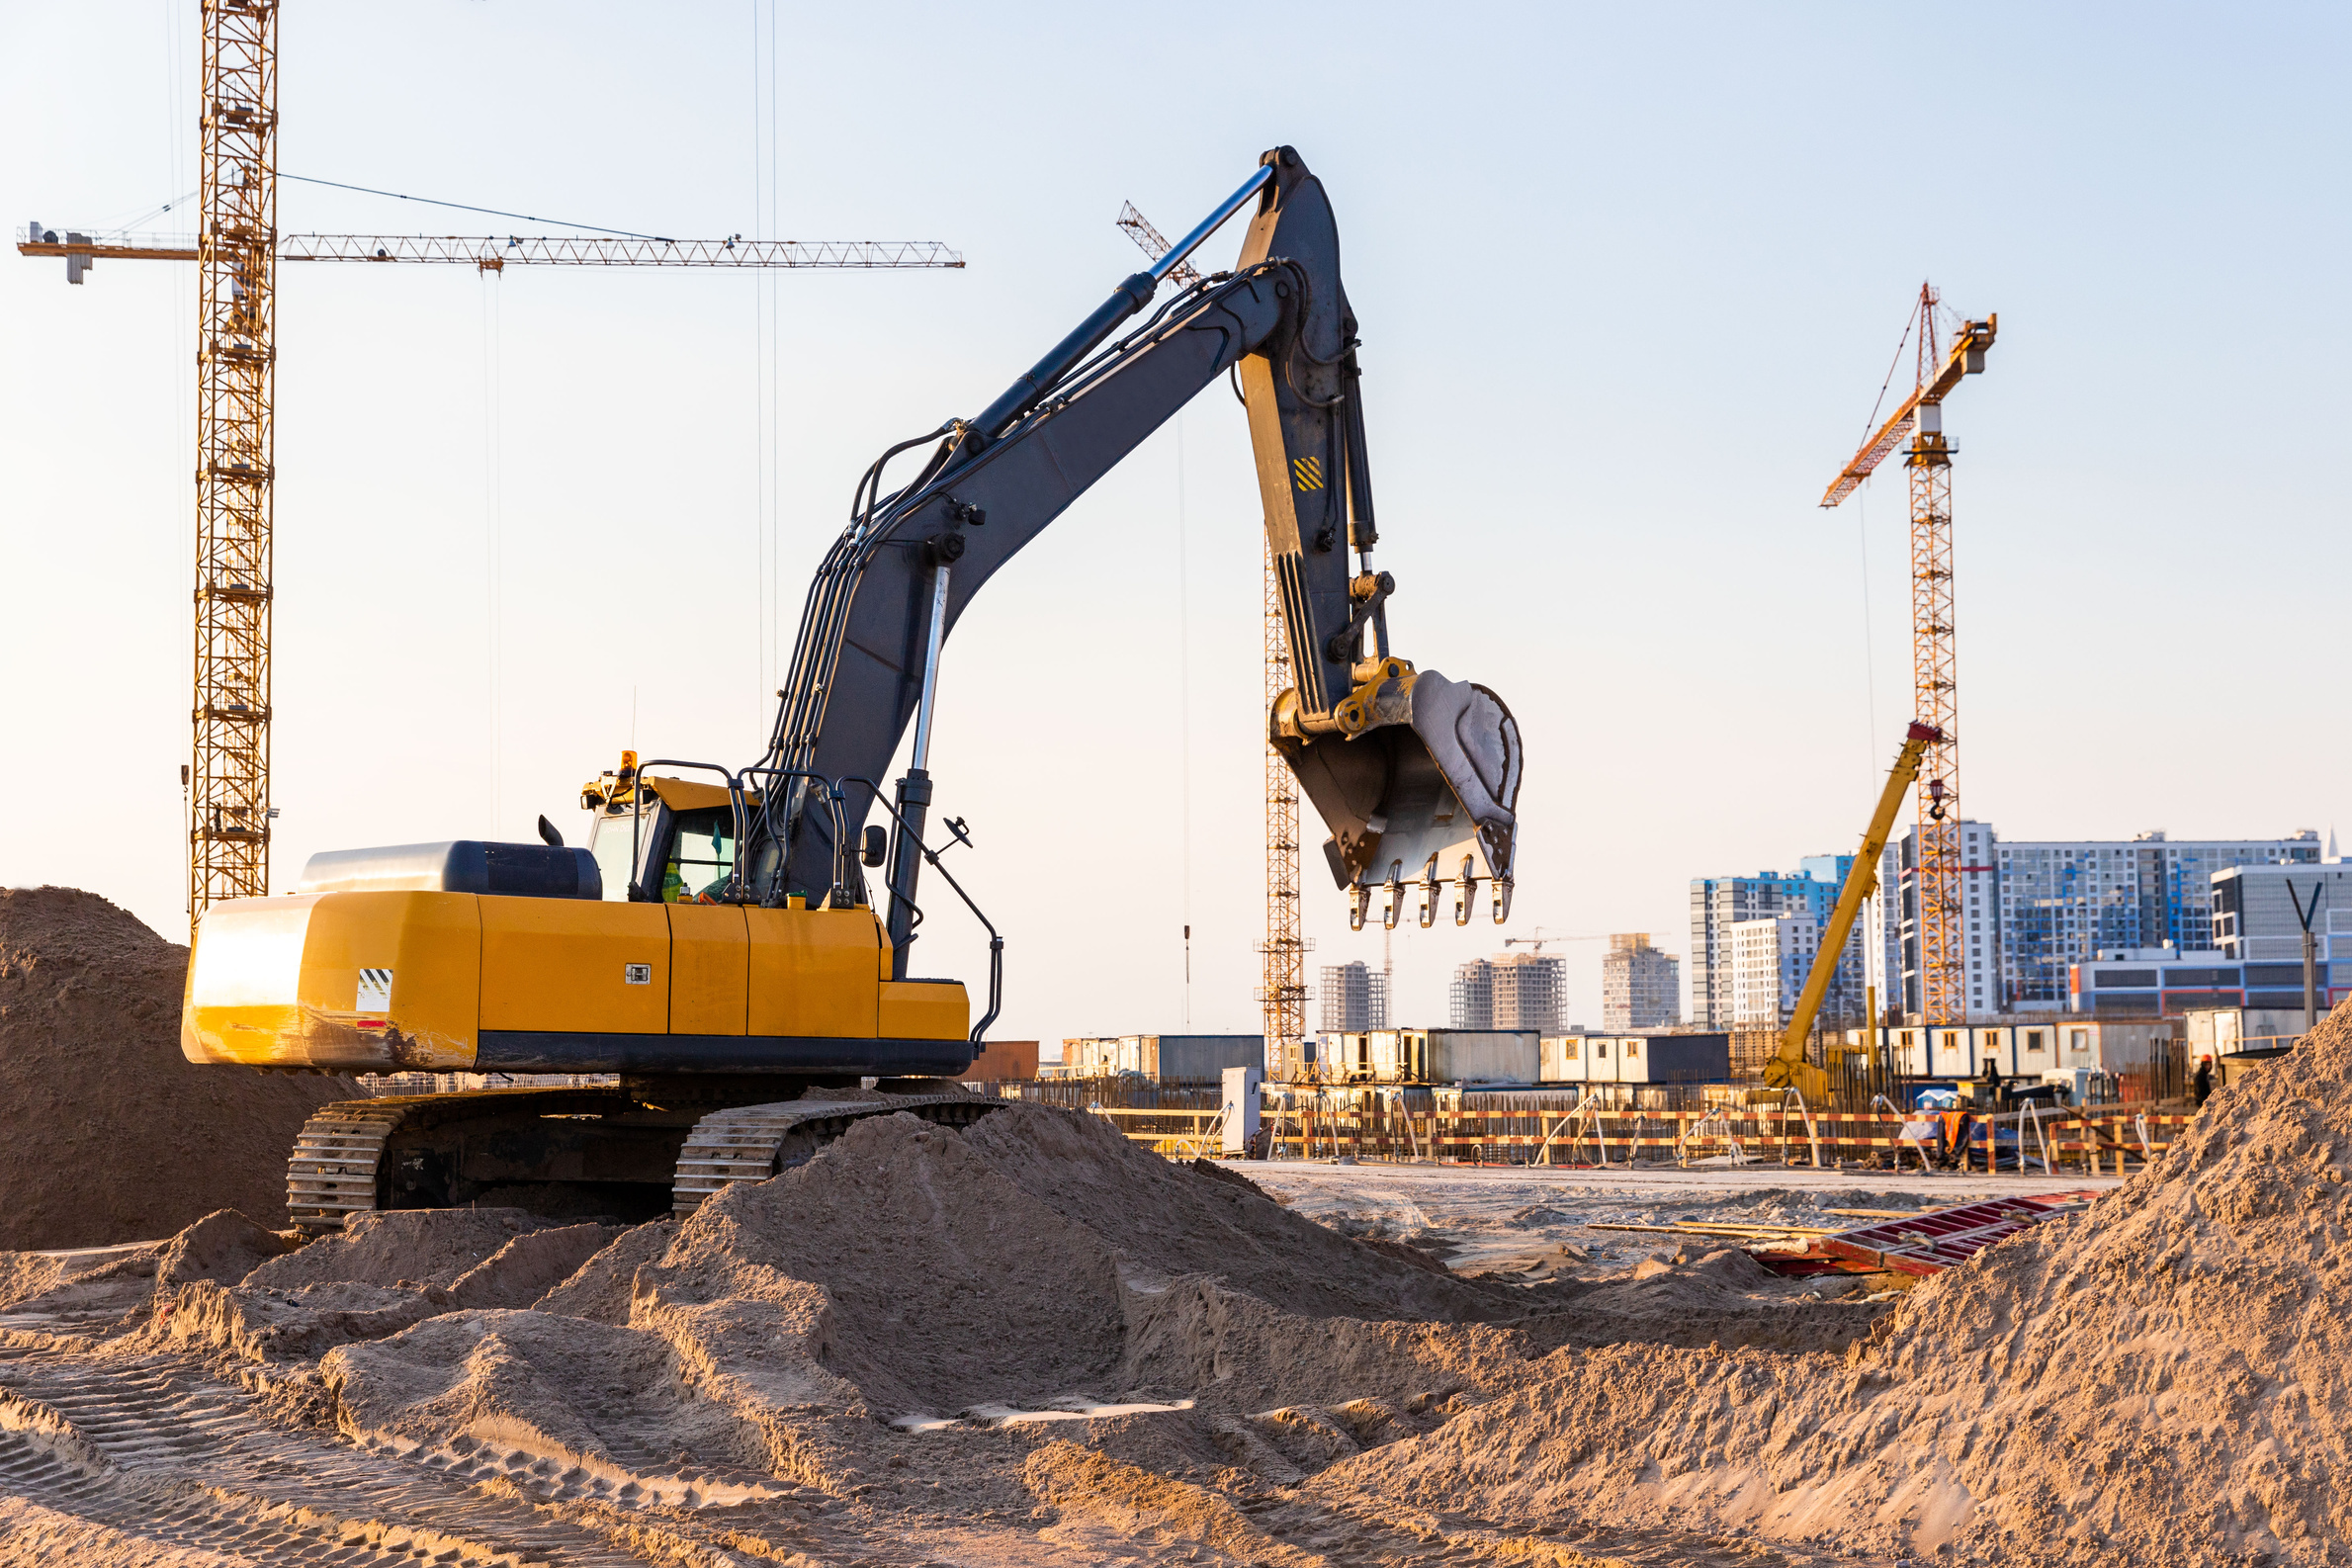 Tower Cranes and Excavator at Construction Site